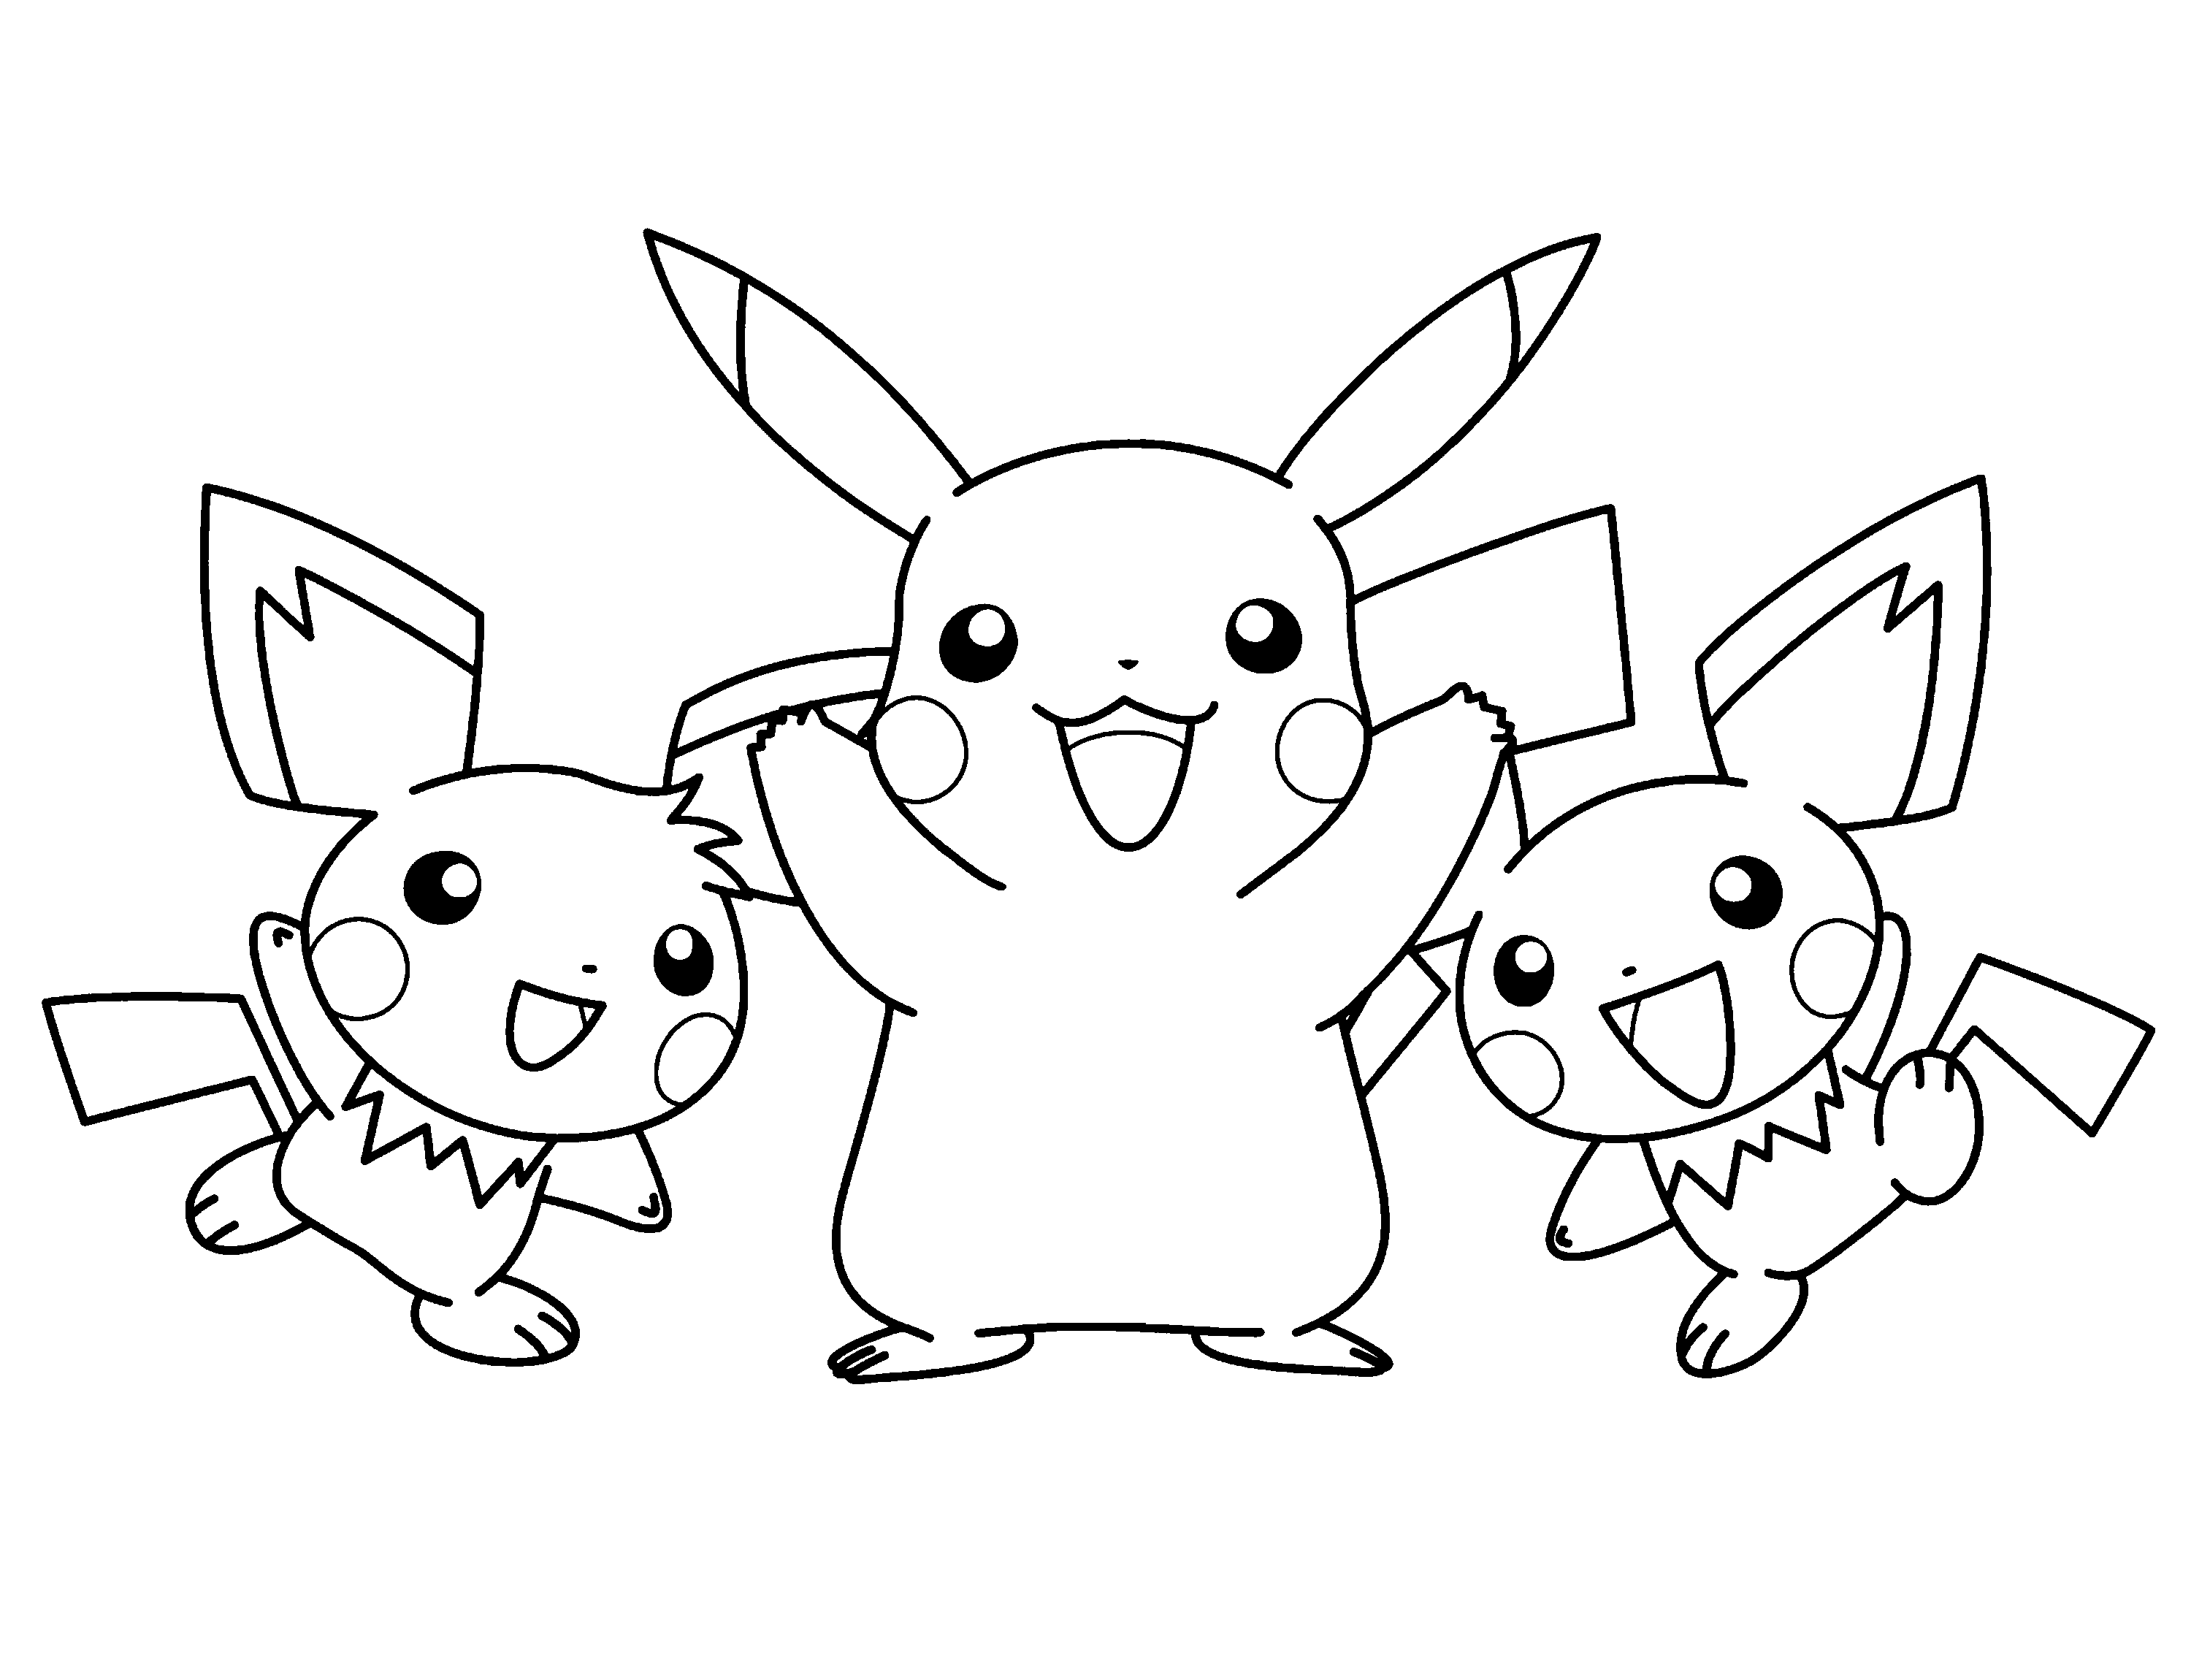 Print A Lot Of Those Pokemon Coloring Sheets And Then Create A Vibrant Cover Binding